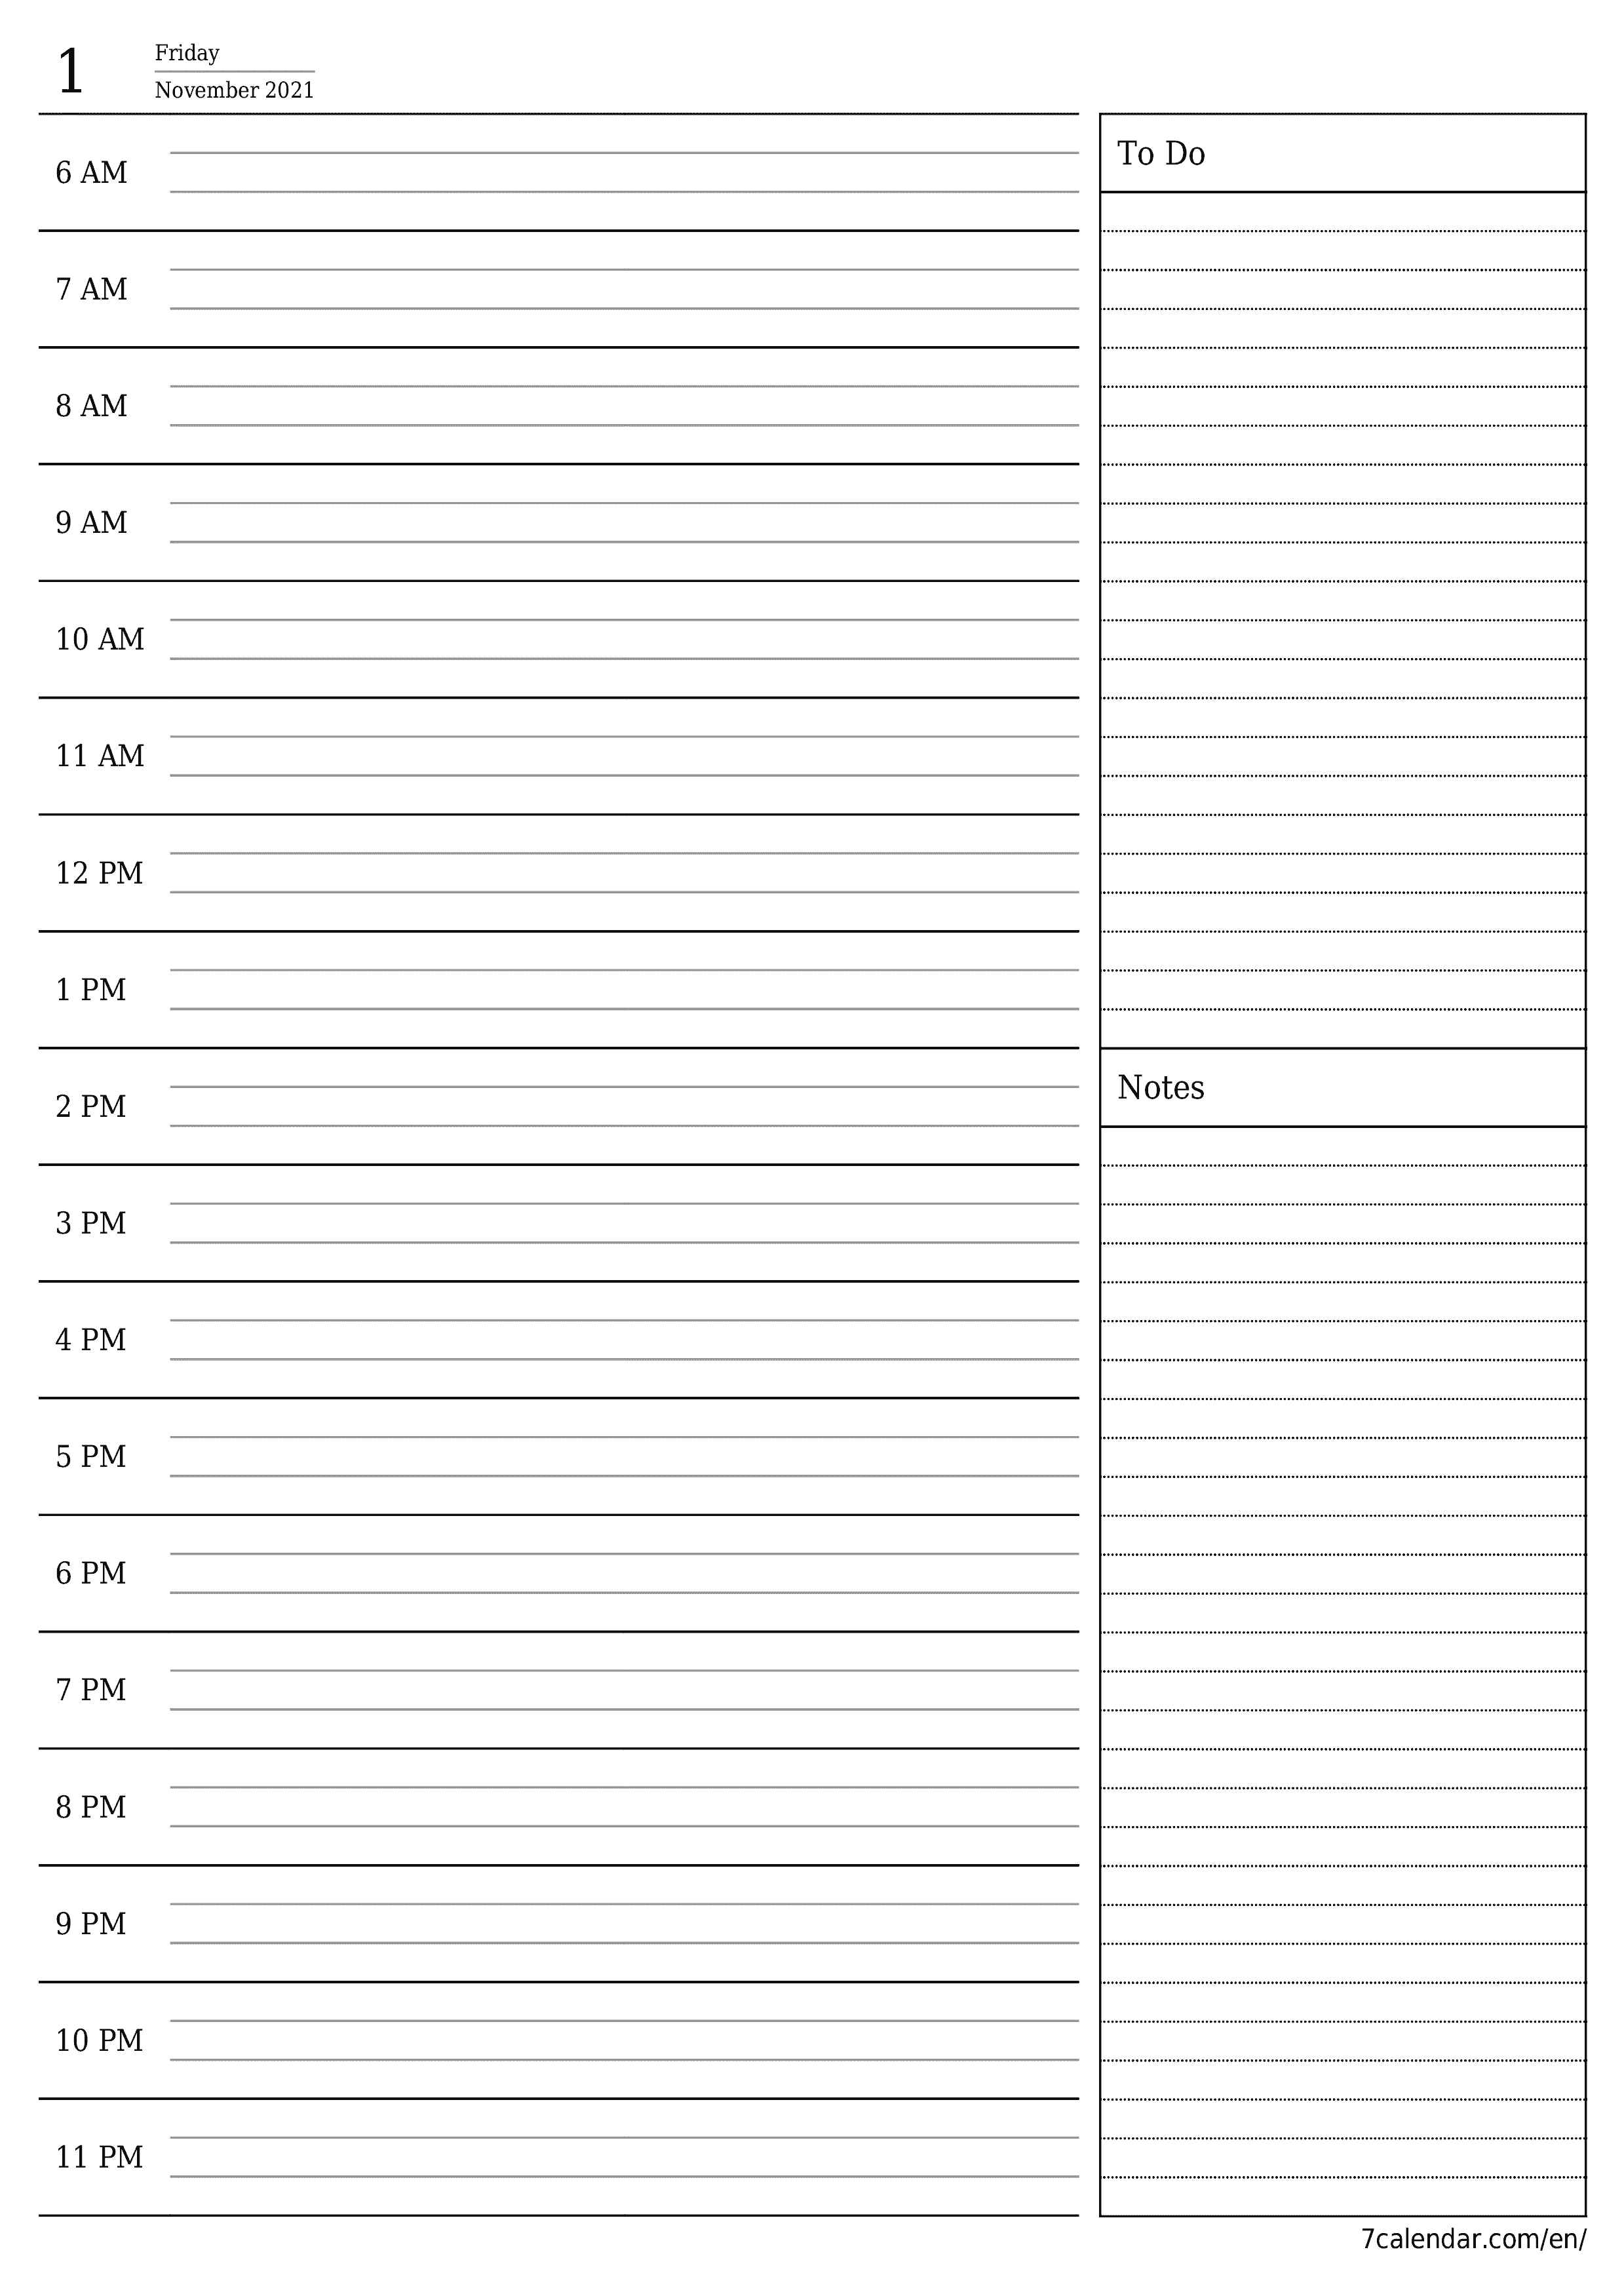 Blank daily printable calendar and planner for day November 2021 with notes, save and print to PDF PNG English